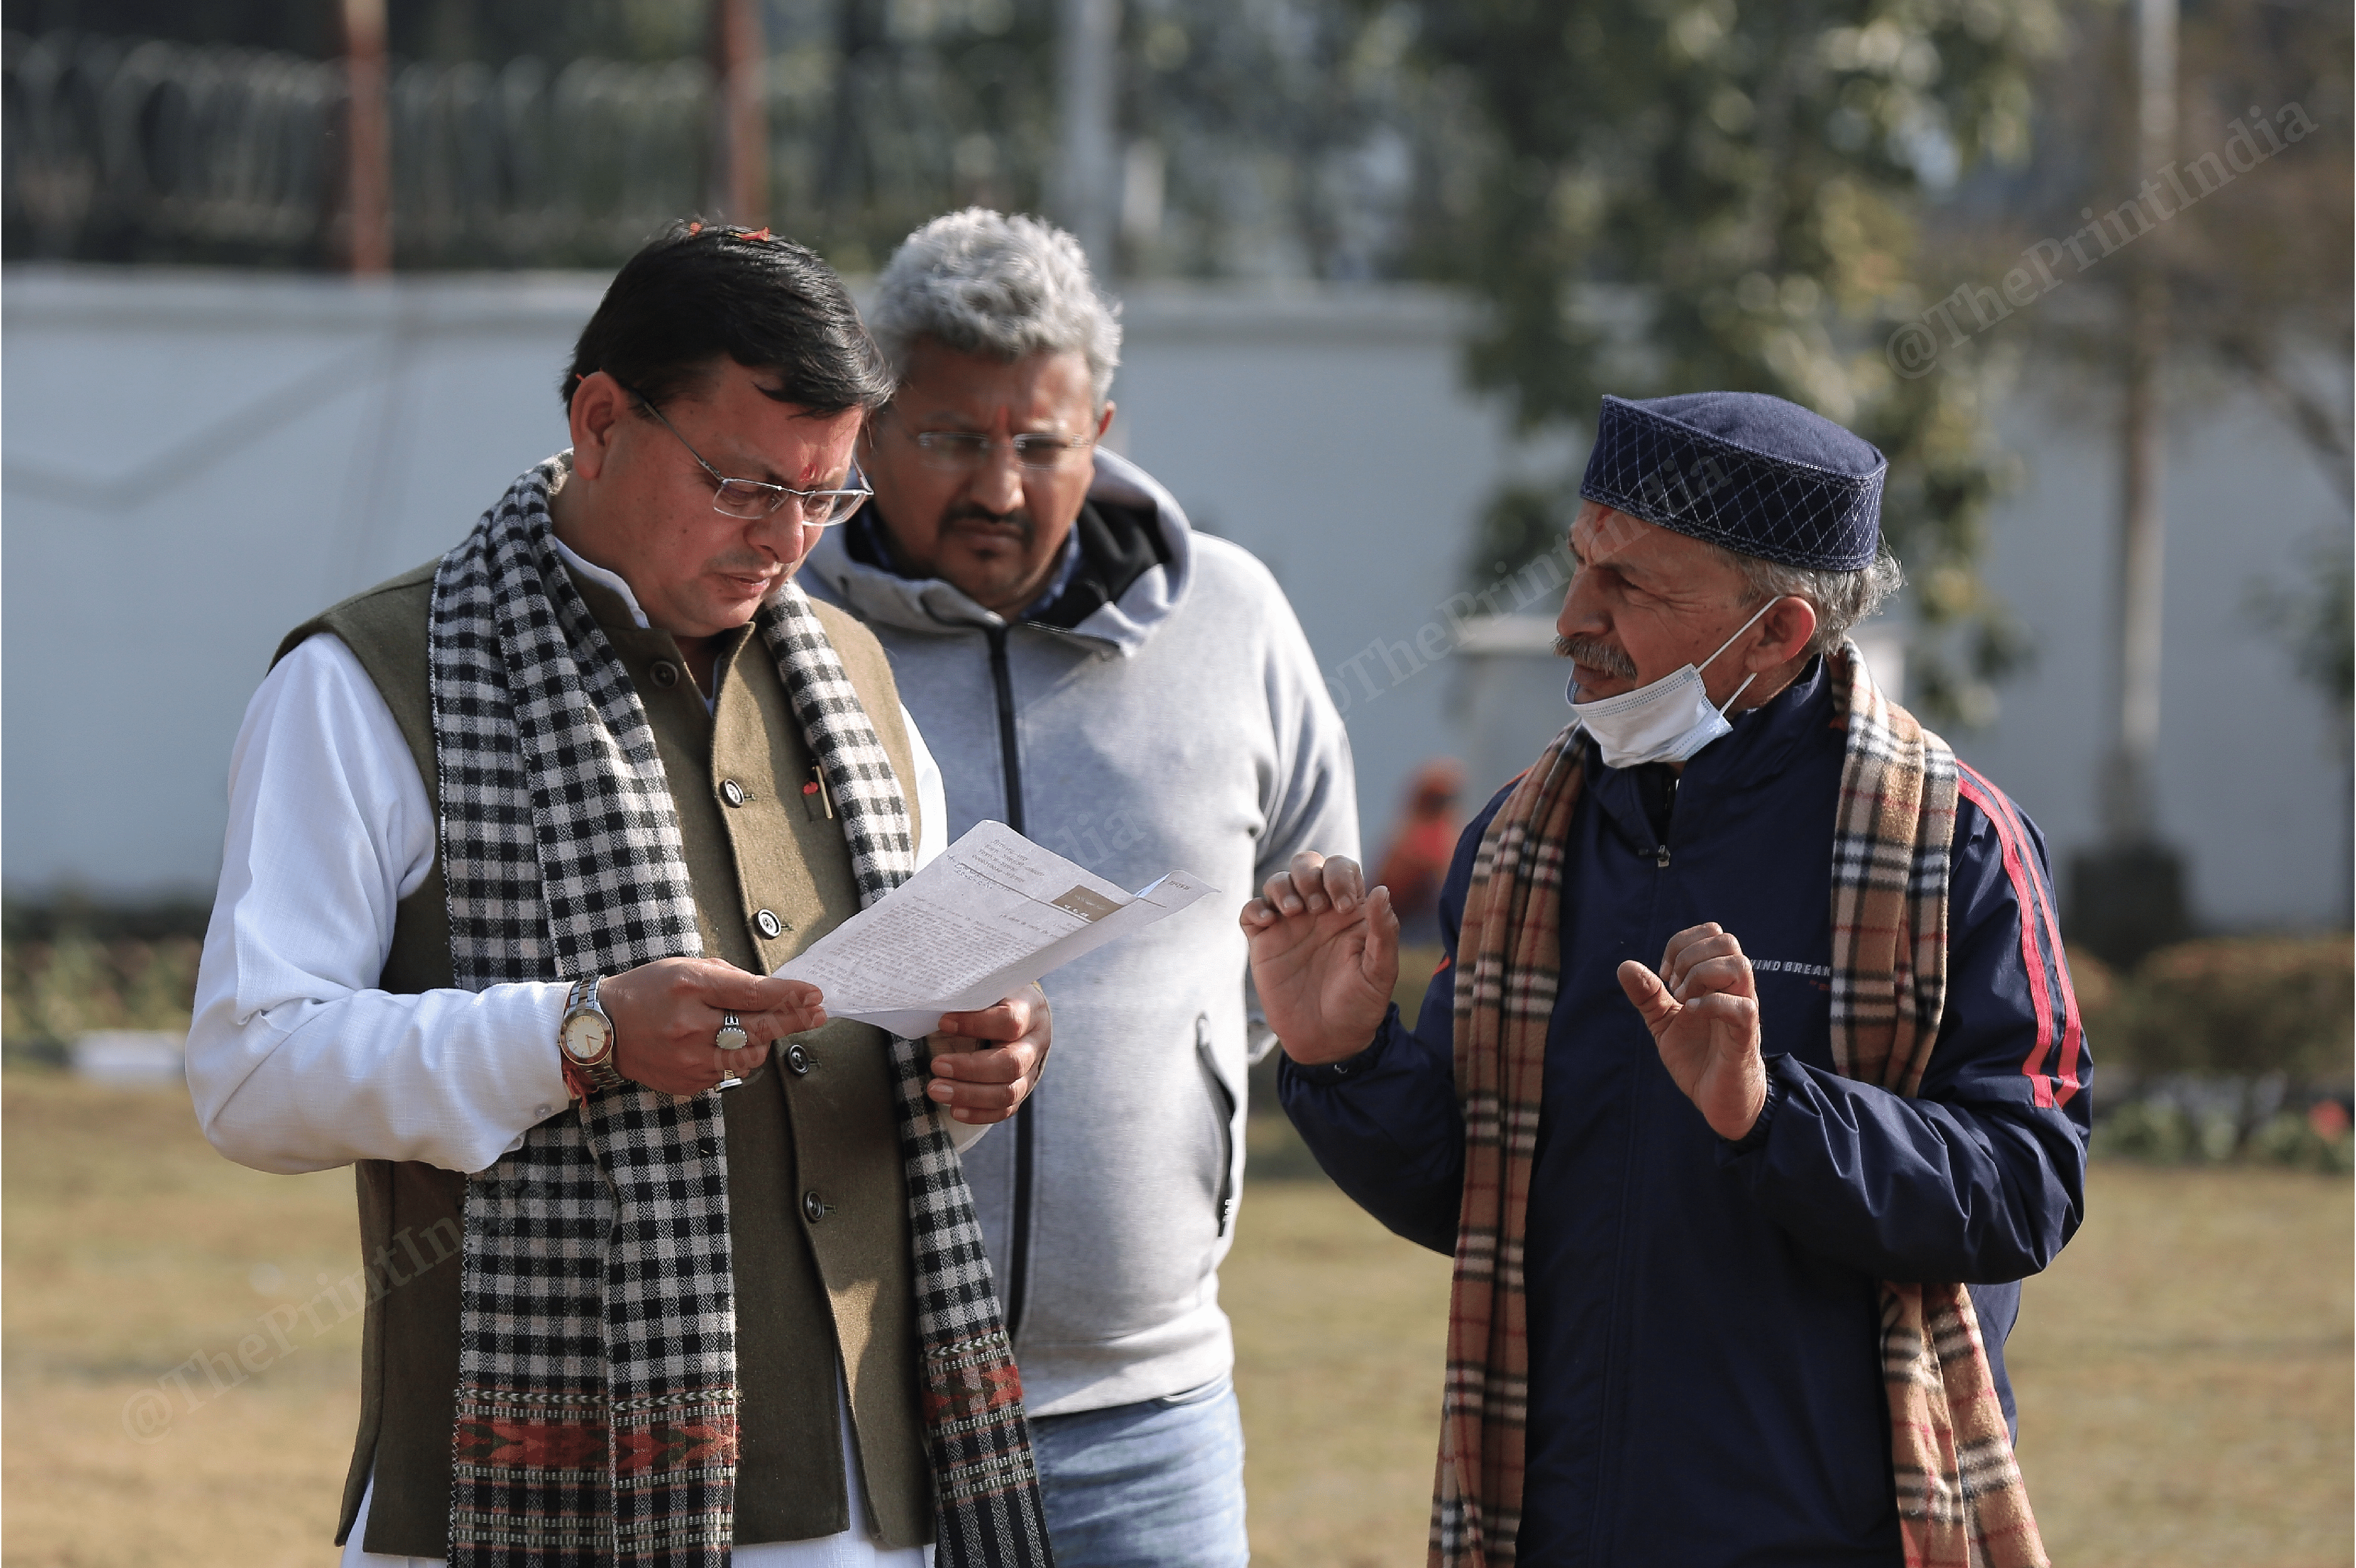 Uttarakhand CM Pushkar Singh Dhami was seen interacting with party leaders and other members at his residence in Dehradun | Photo: Suraj Singh Bisht | ThePrint